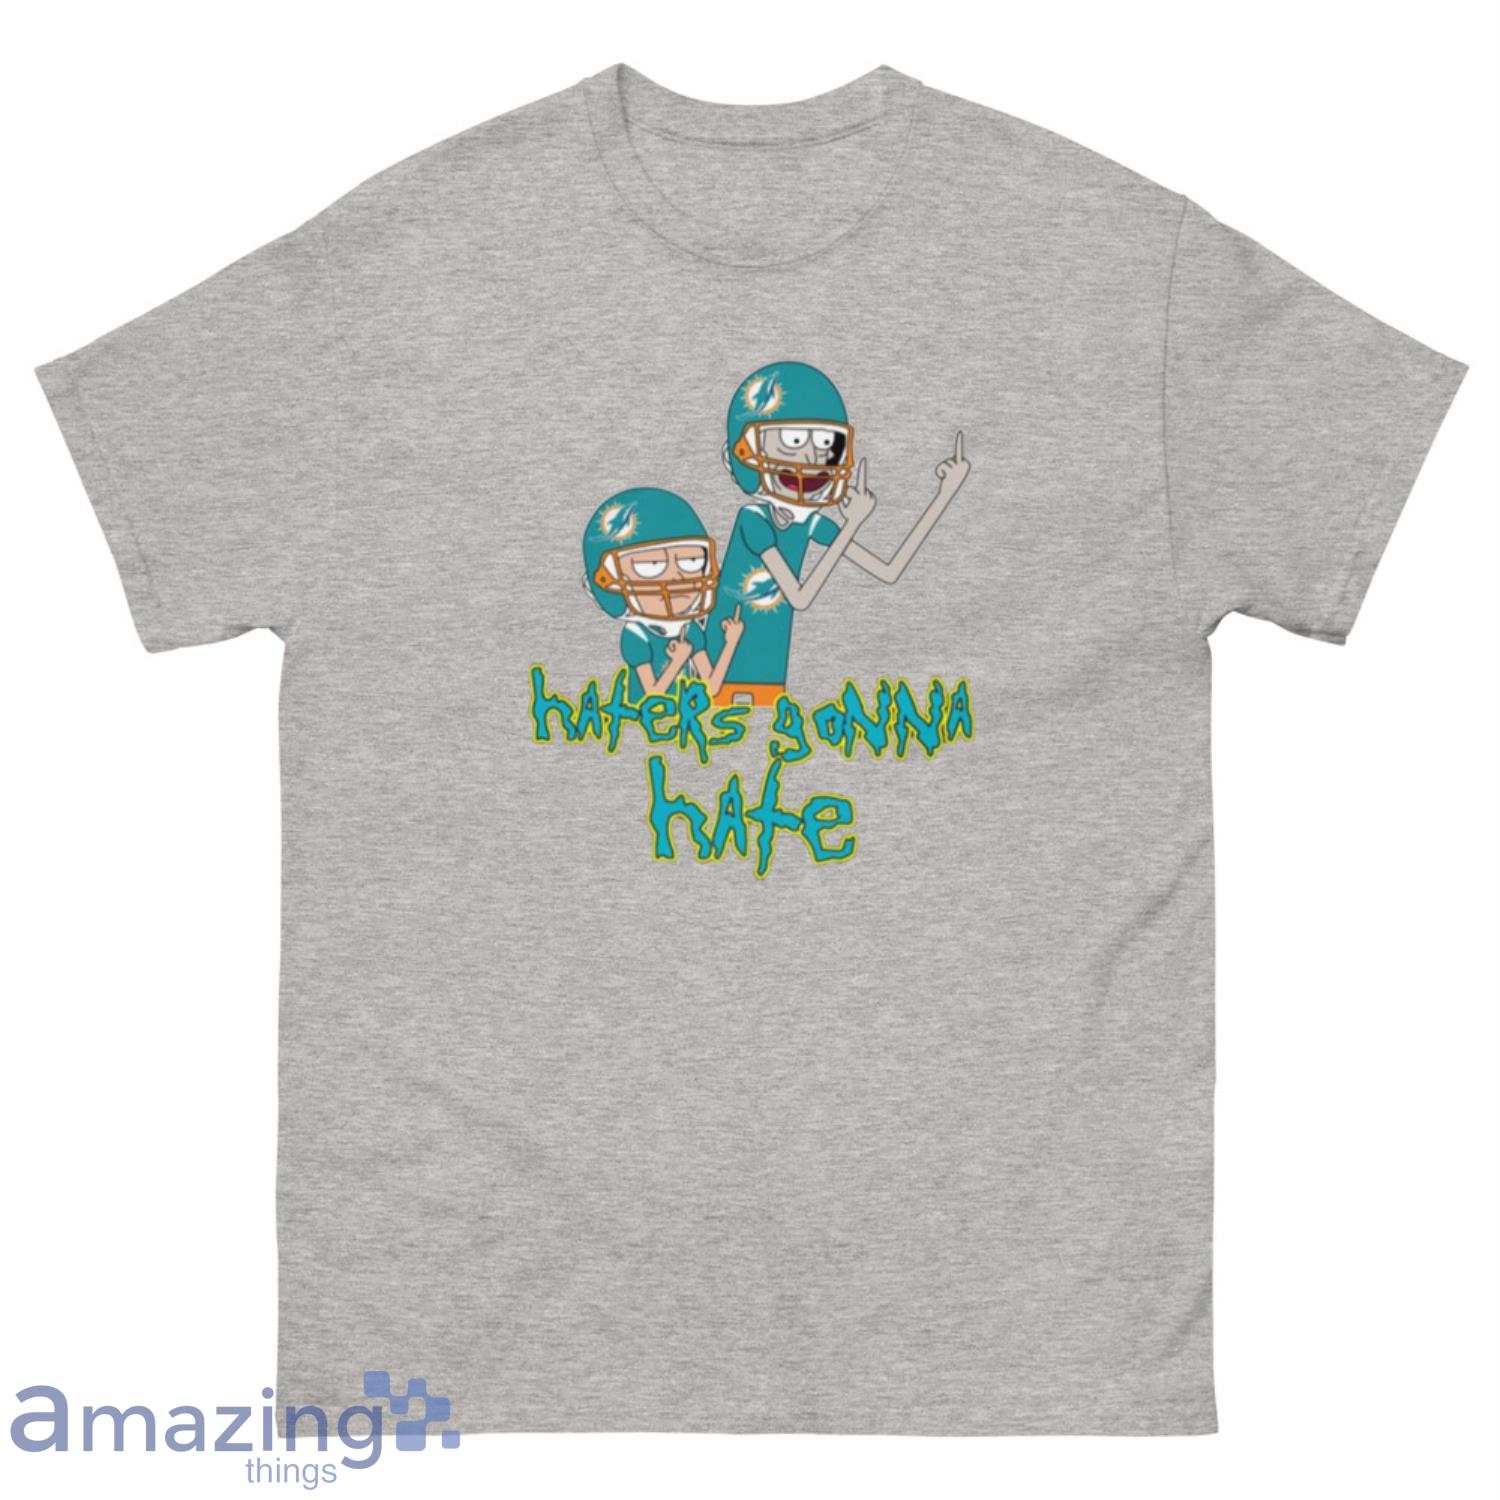 NFL Miami Dolphins Football Rick And Morty Haters Gonna Hate T-Shirt Sweatshirt Hoodie - 500 Men’s Classic Tee Gildan-1